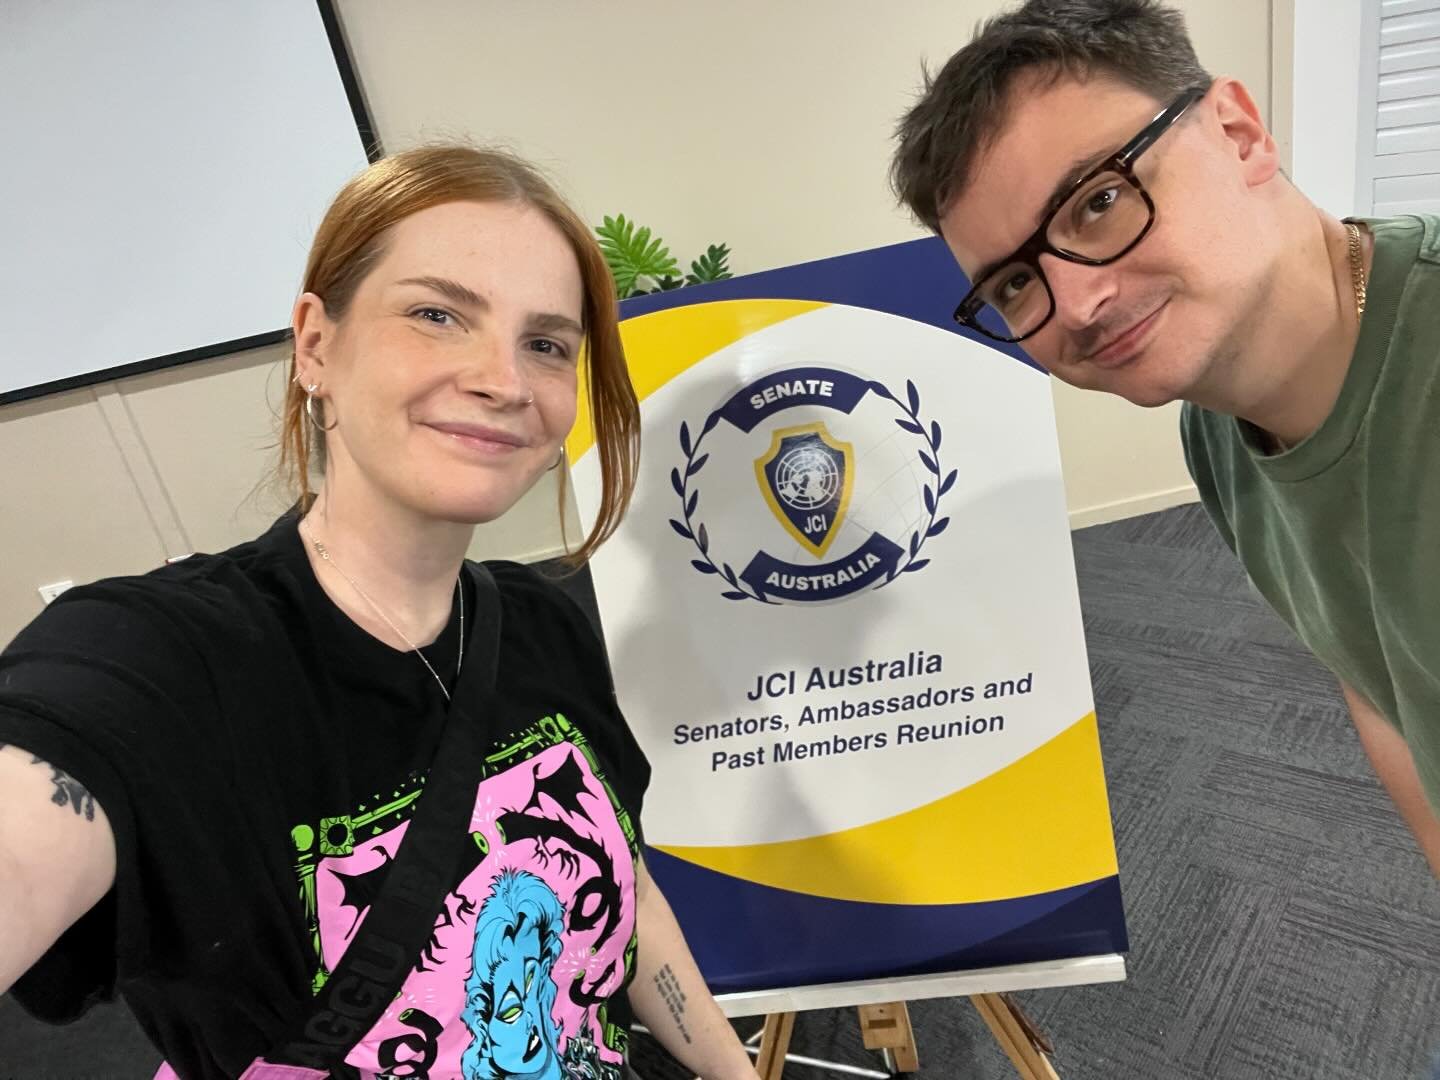 Past Brisbane Presidents Alex and Olivia are in Mooloolaba this weekend for the JCI Australia Senate, Ambassadors and Past Members Reunion. Looking forward to a great couple of days with old and new friends!

Thank you to @eprintonline for the fantas